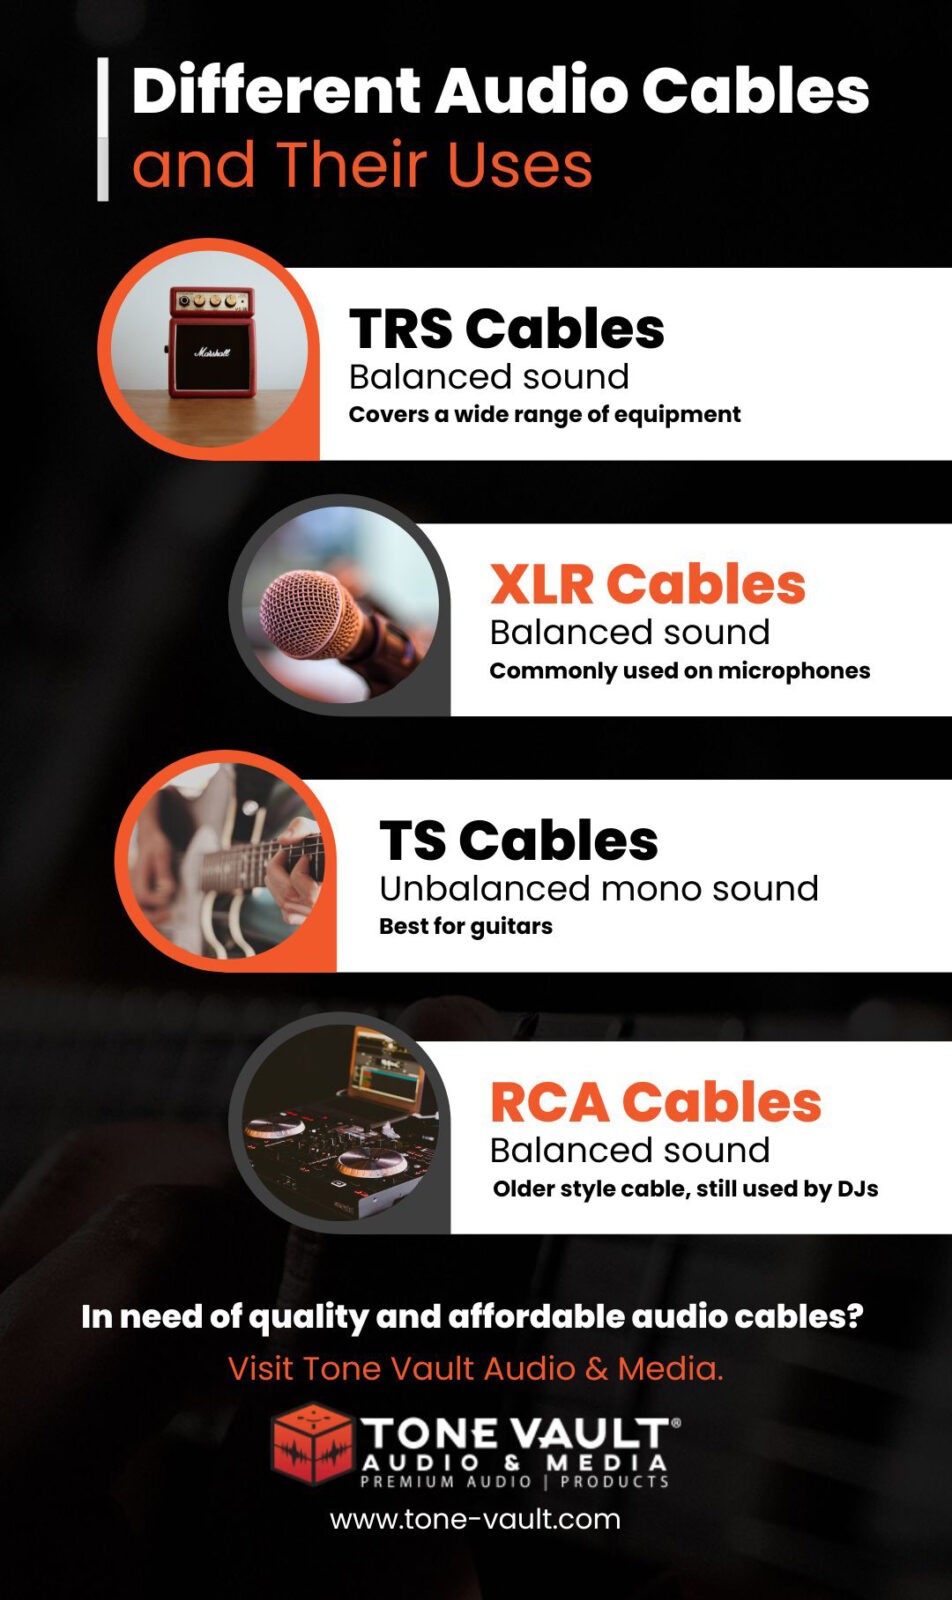 Different Audio Cables and Their Uses Infographic